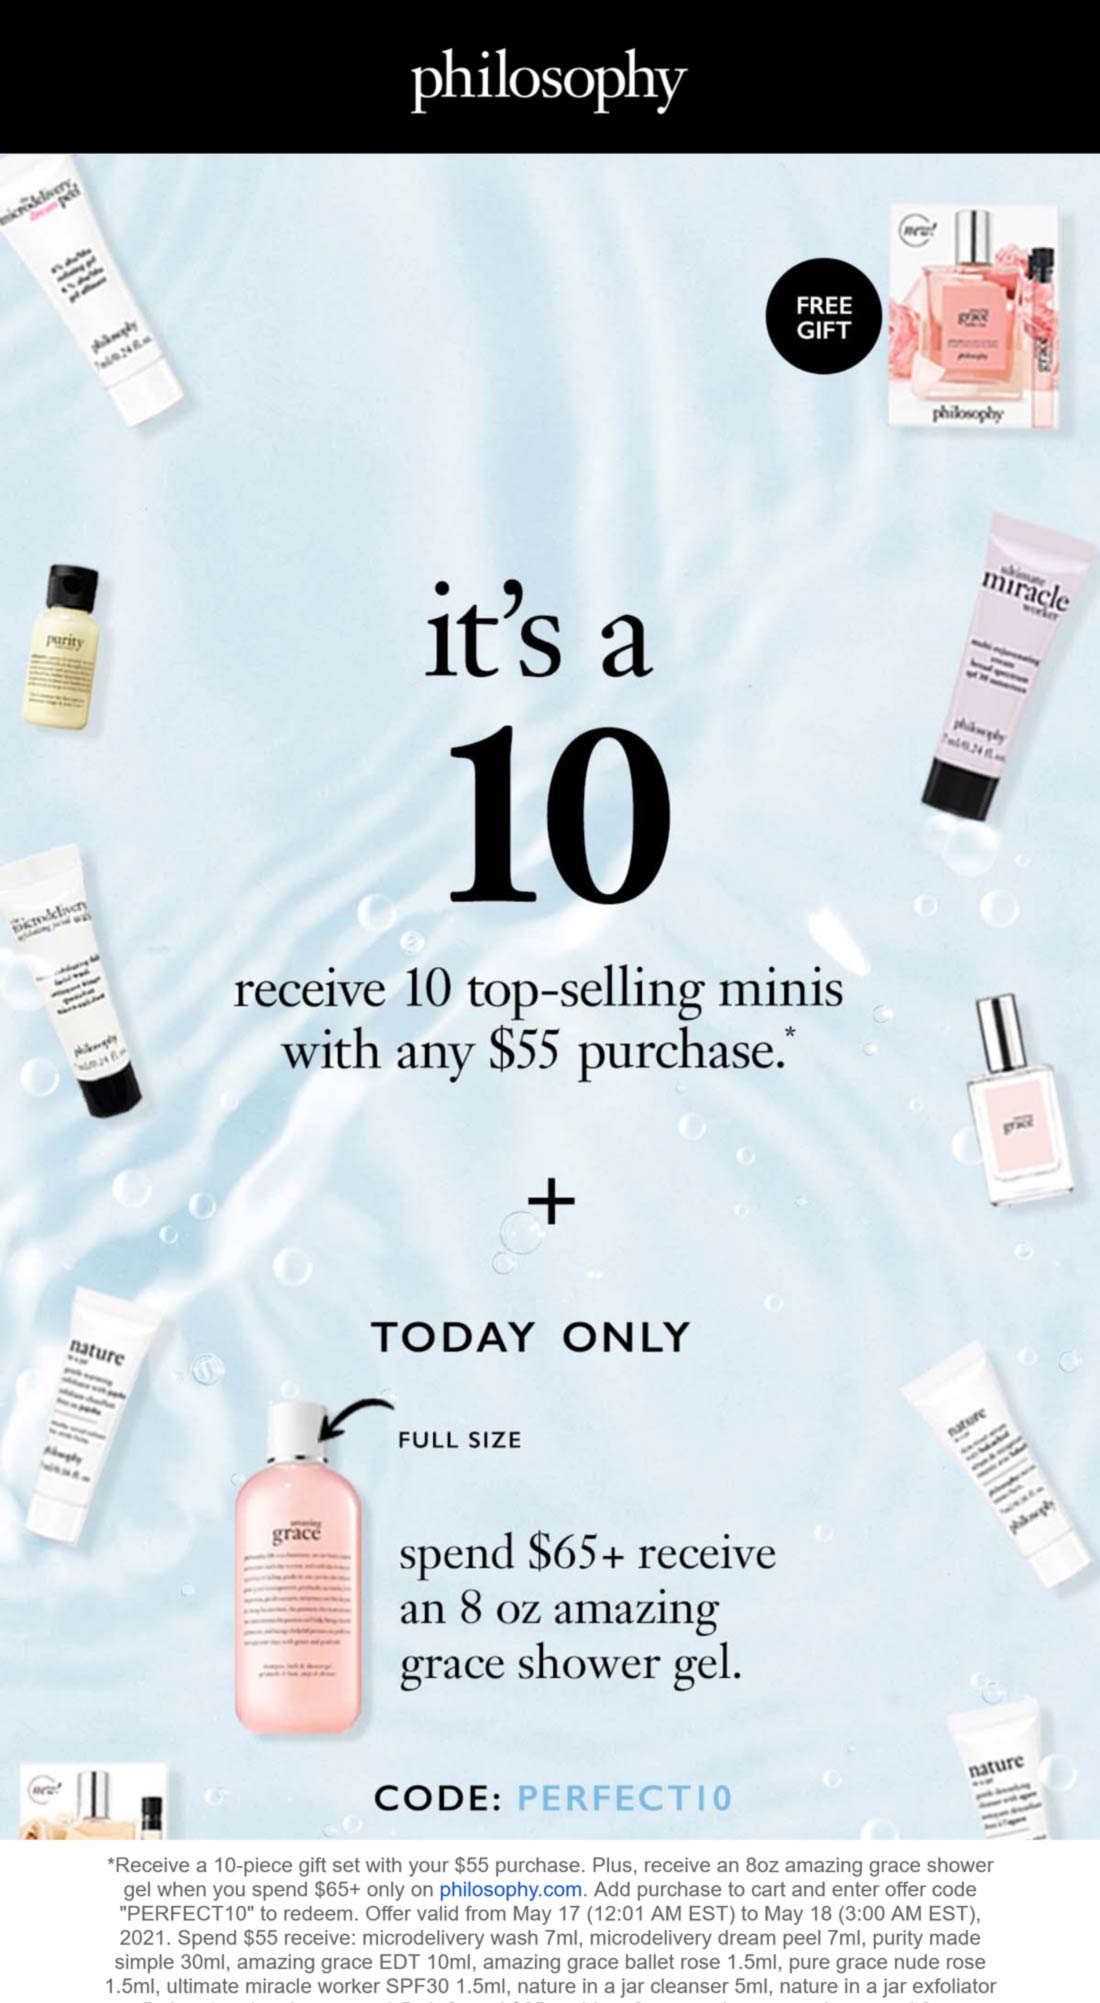 Philosophy stores Coupon  Free 10pc set + full size with $65 spent today at Philosophy via promo code PERFECT10 #philosophy 